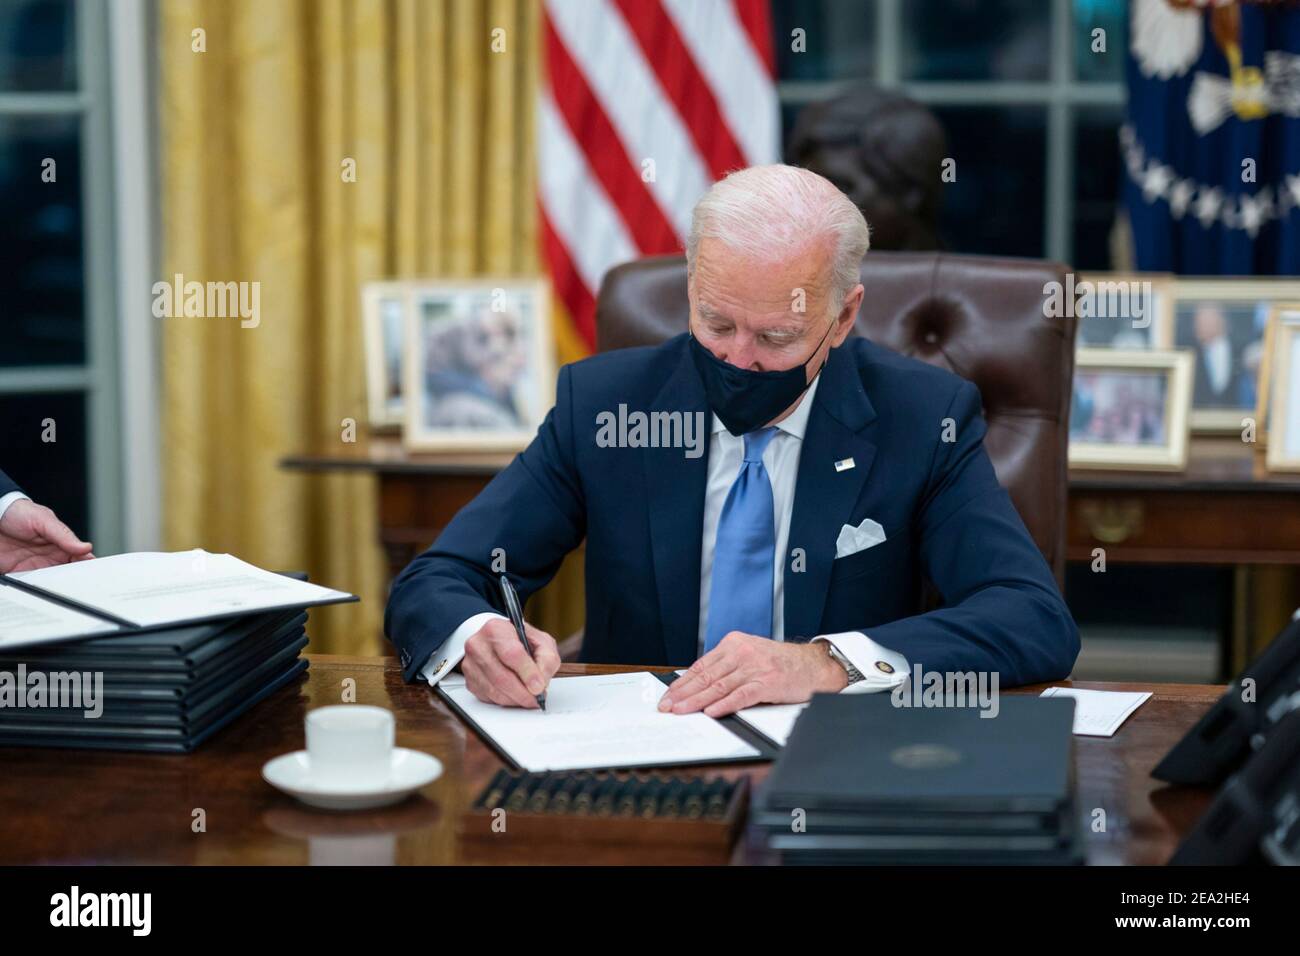 U.S President Joe Biden signs one of the 17 Executive Orders on Inauguration Day in the Oval Office of the White House January 20, 2021 in Washington, D.C. Stock Photo